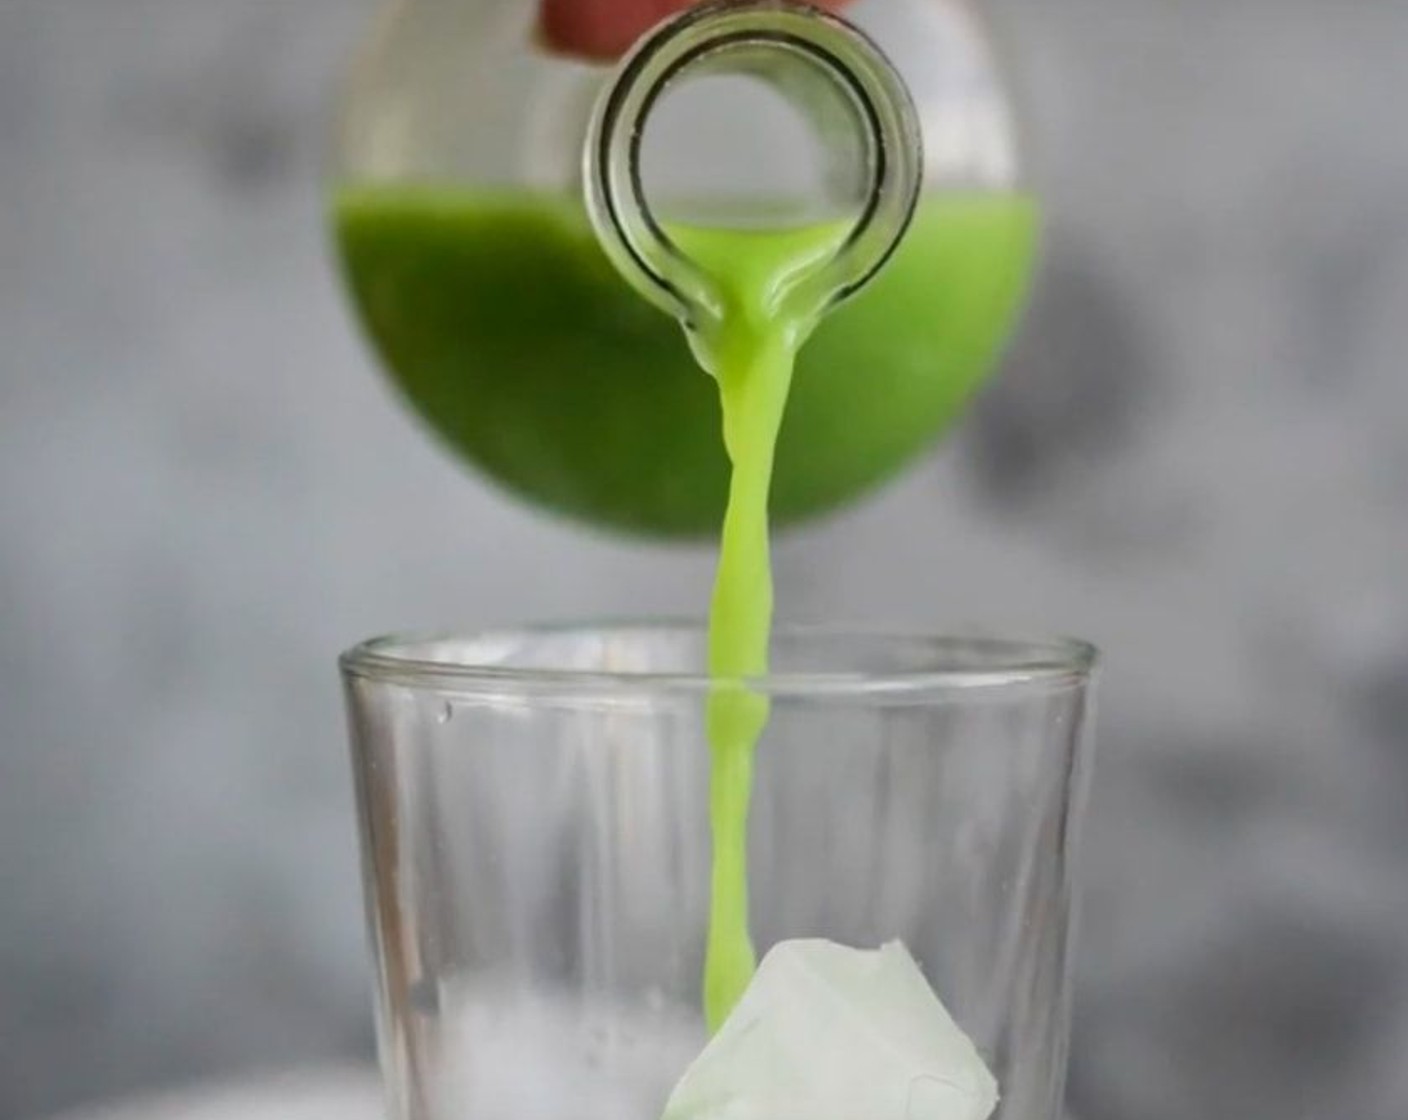 step 7 Fill your glass with ice and pour matcha into glasses. Enjoy!